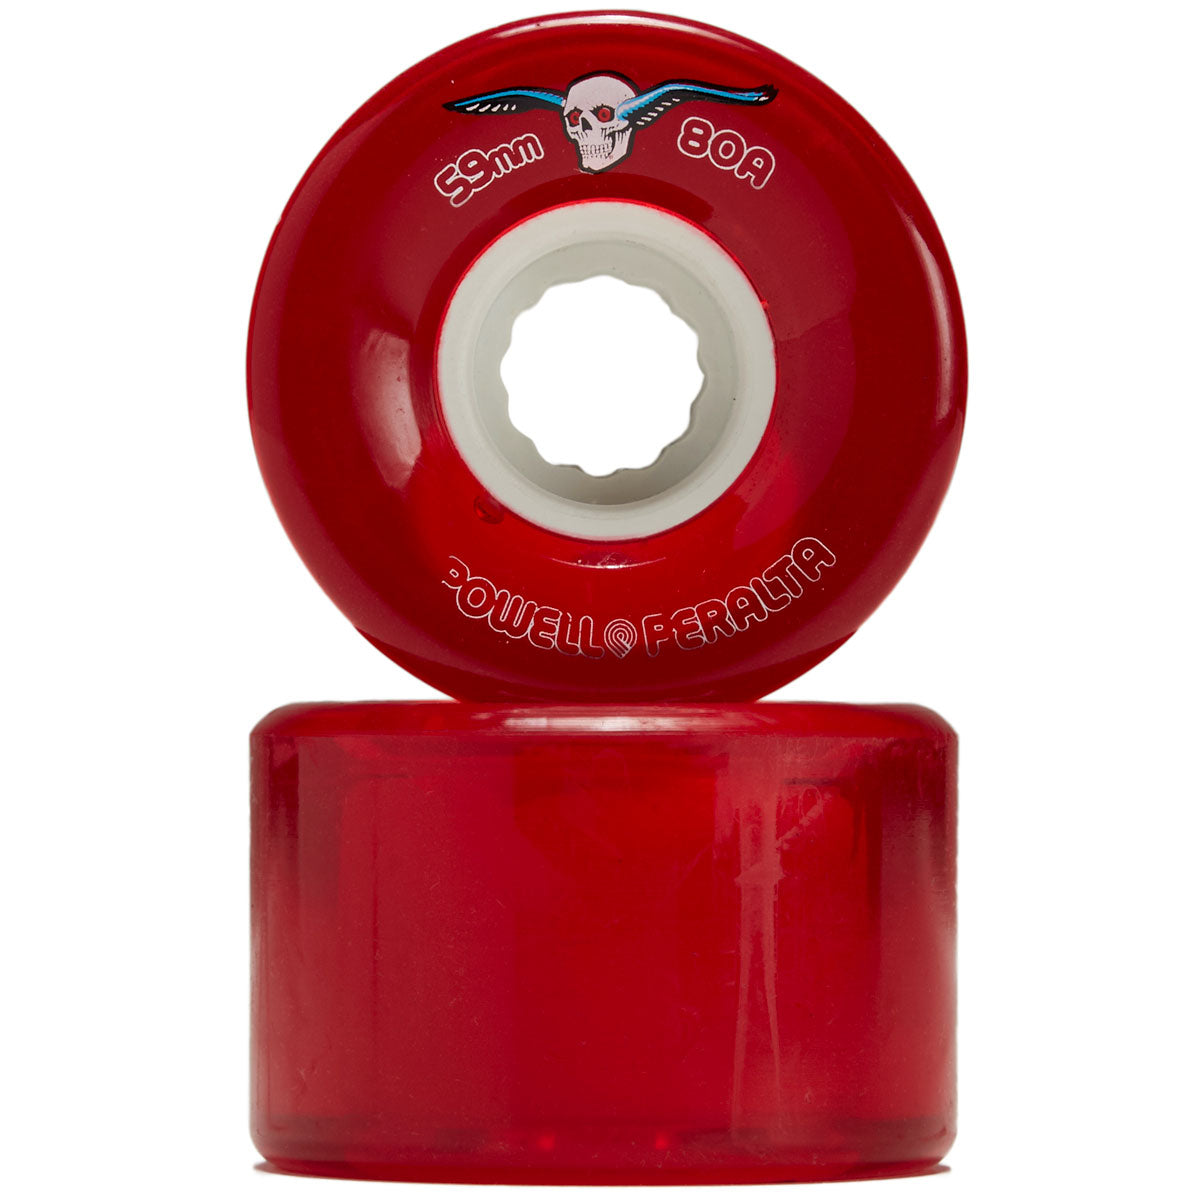 Powell-Peralta Clear Cruisers 80A Skateboard Wheels - Red - 59mm image 2